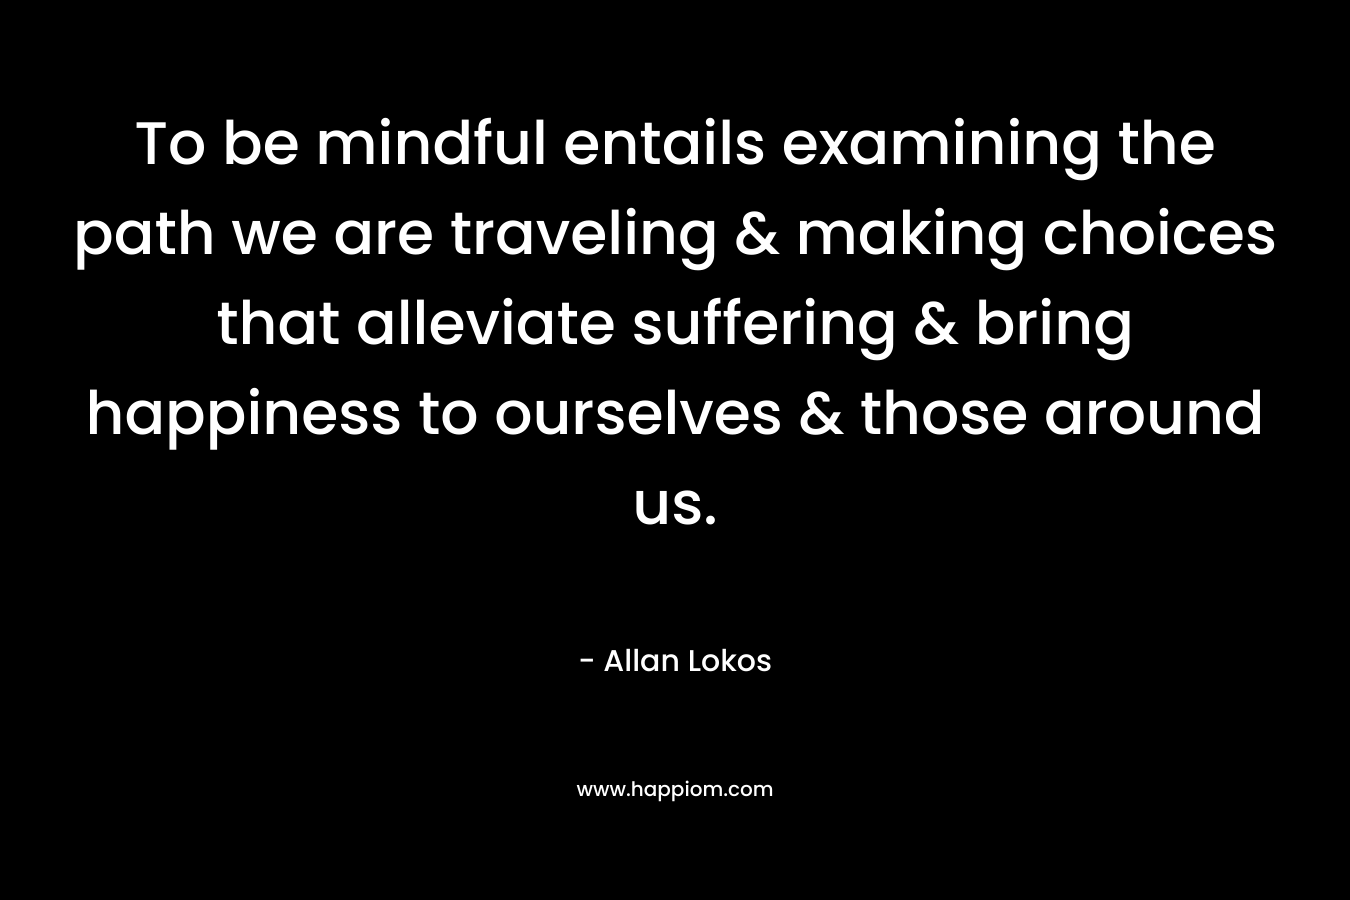 To be mindful entails examining the path we are traveling & making choices that alleviate suffering & bring happiness to ourselves & those around us. – Allan Lokos